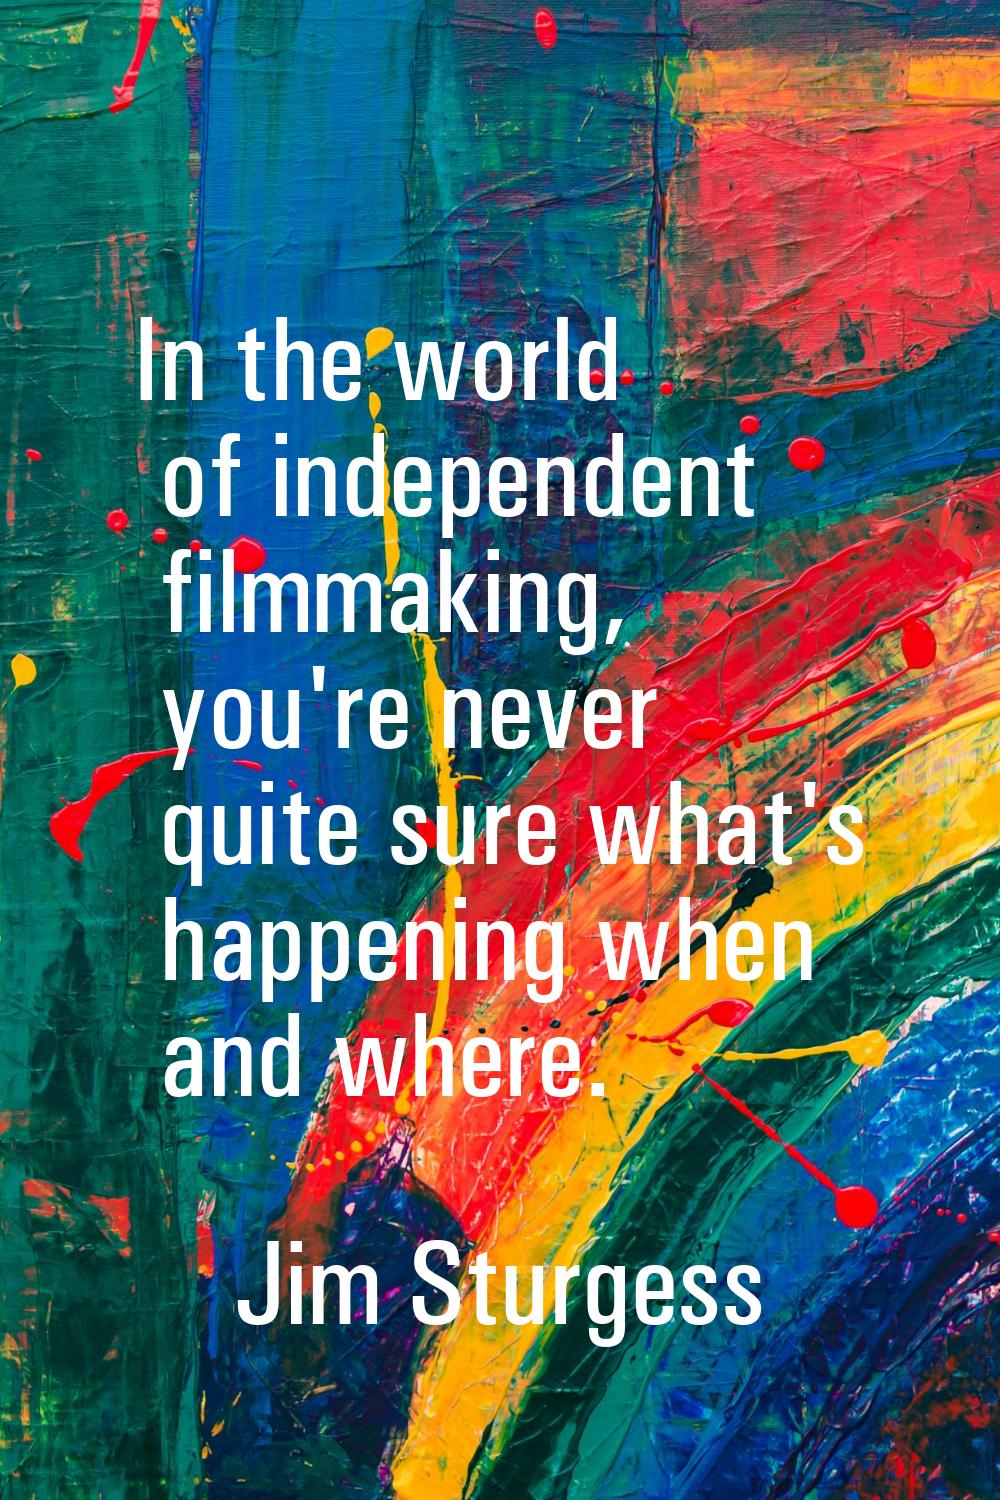 In the world of independent filmmaking, you're never quite sure what's happening when and where.